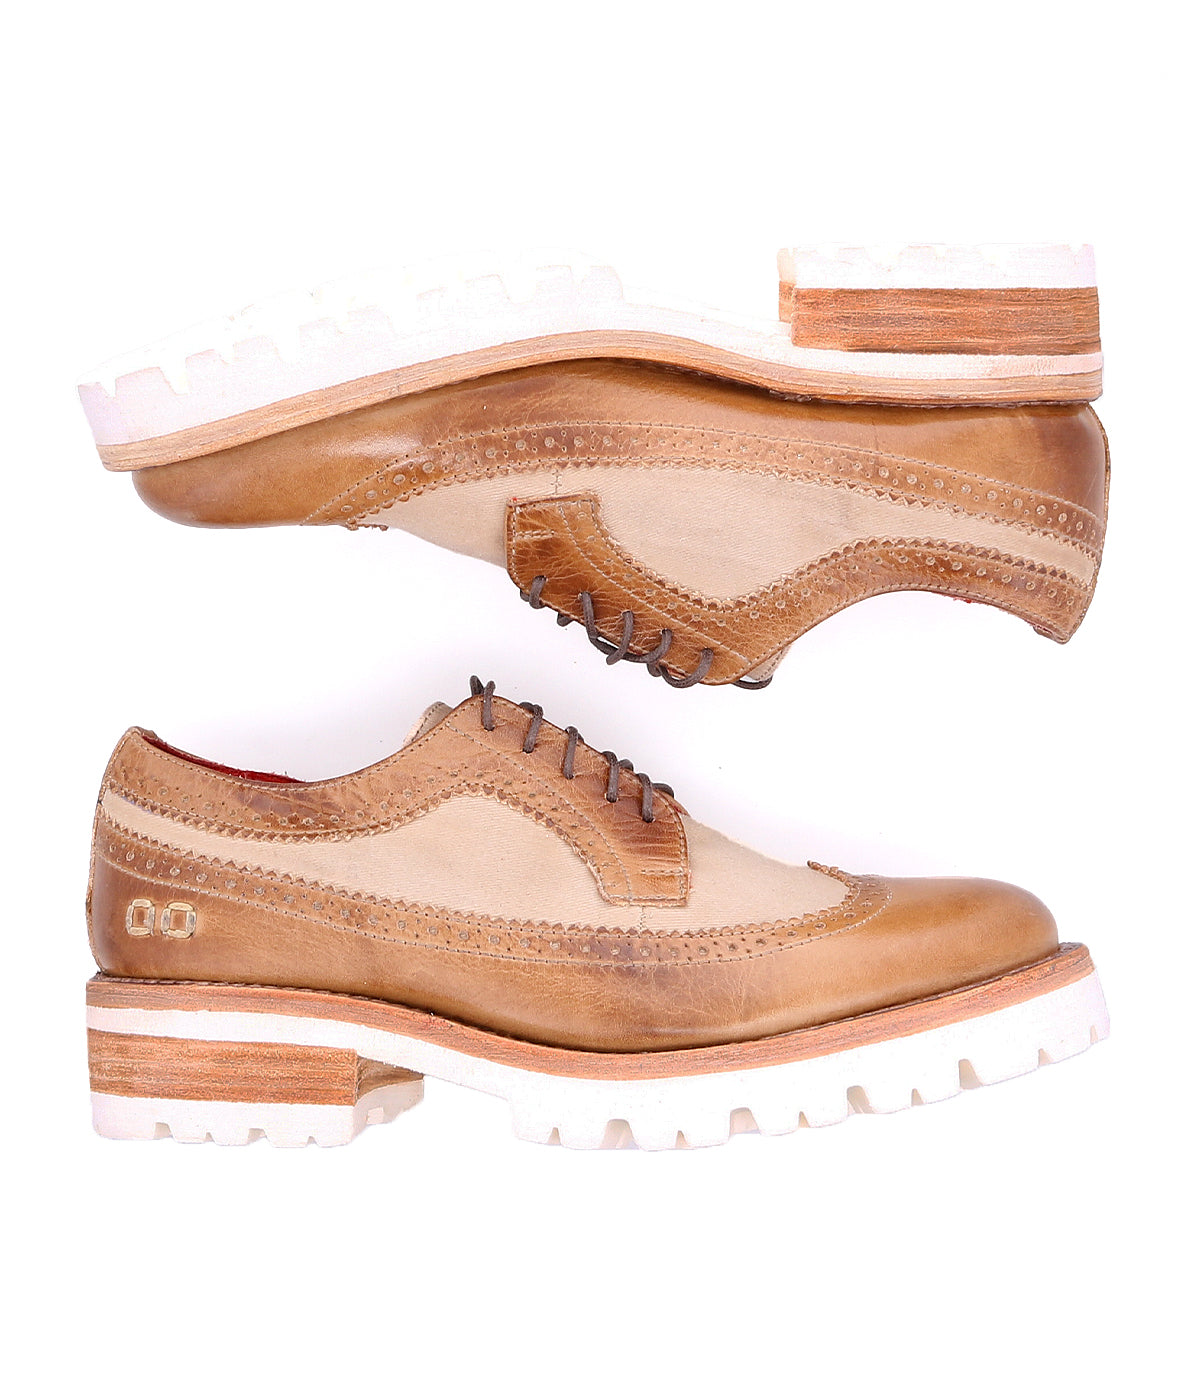 A pair of Bed Stu Lita K III tan shoes with white soles, perfect for a fall wardrobe.